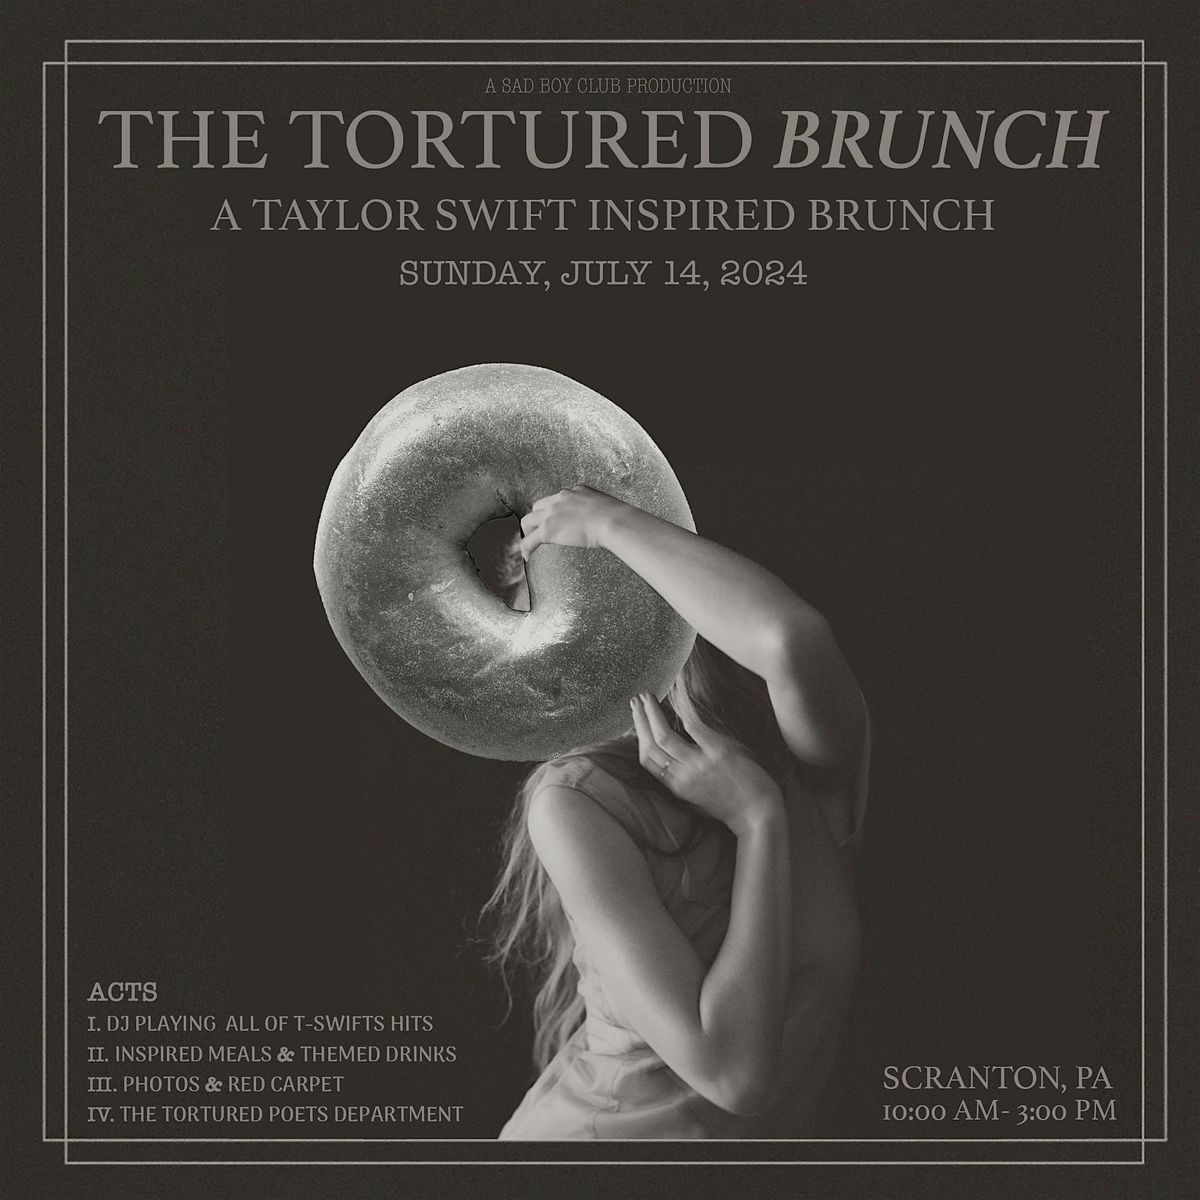 The Tortured Brunch at The Ritz Theater